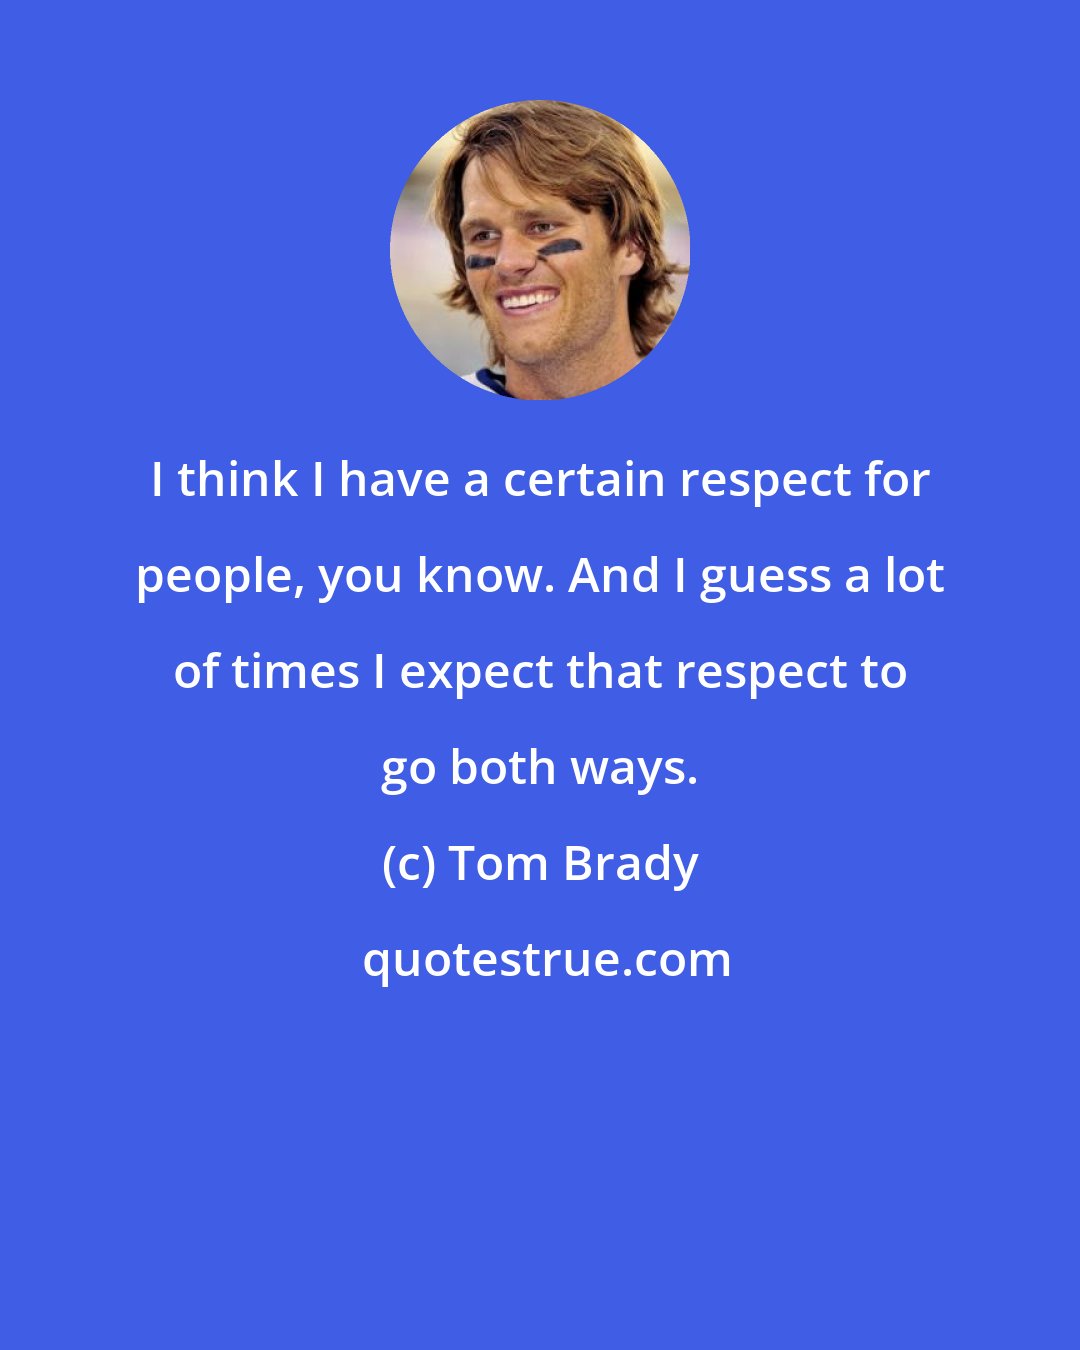 Tom Brady: I think I have a certain respect for people, you know. And I guess a lot of times I expect that respect to go both ways.